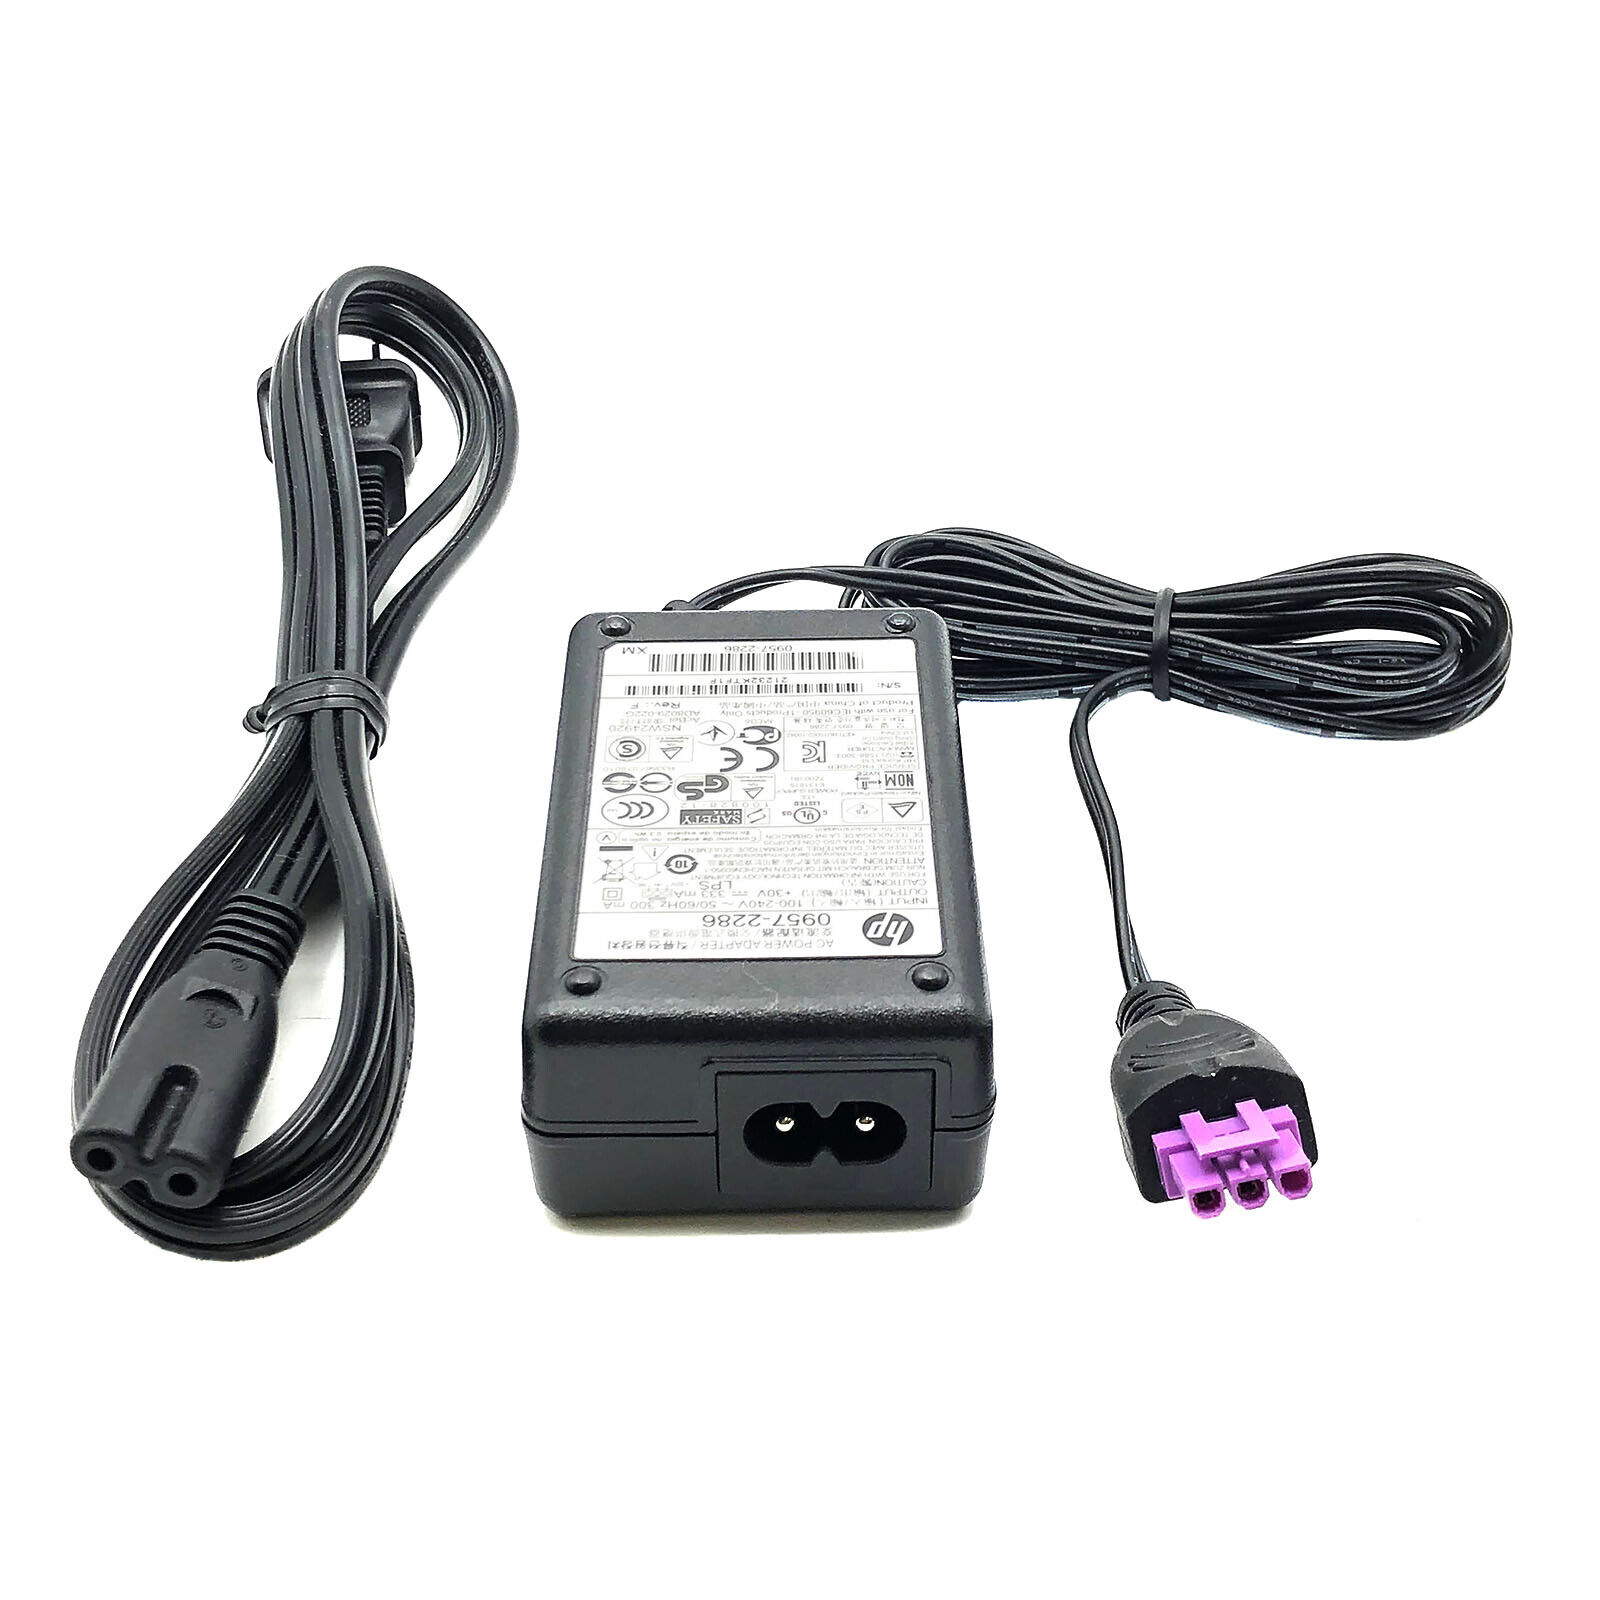 Authentic 10W HP AC DC Adapter Model 0957-2286 30V 333mA (0.33 A) OEM Charger